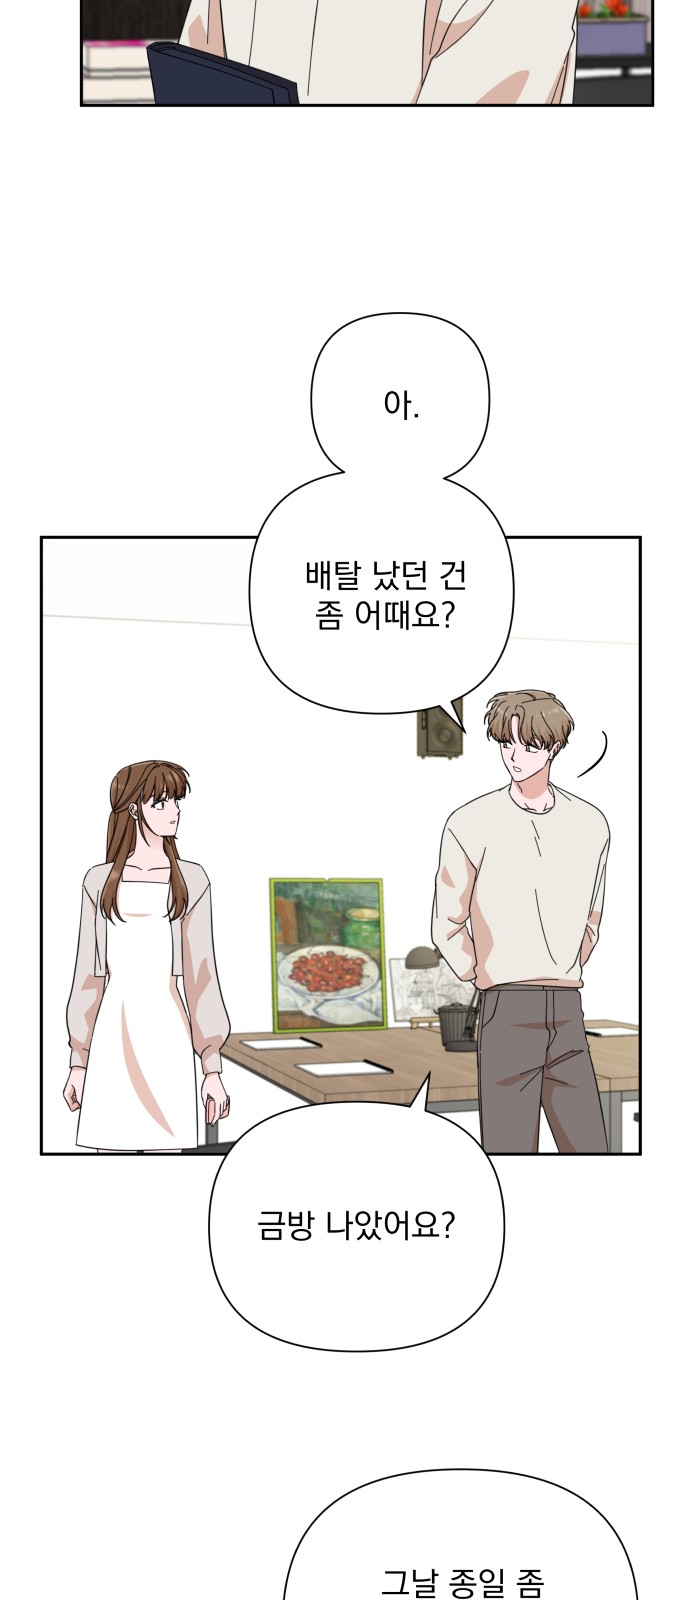 The Man With Pretty Lips - Chapter 48 - Page 8